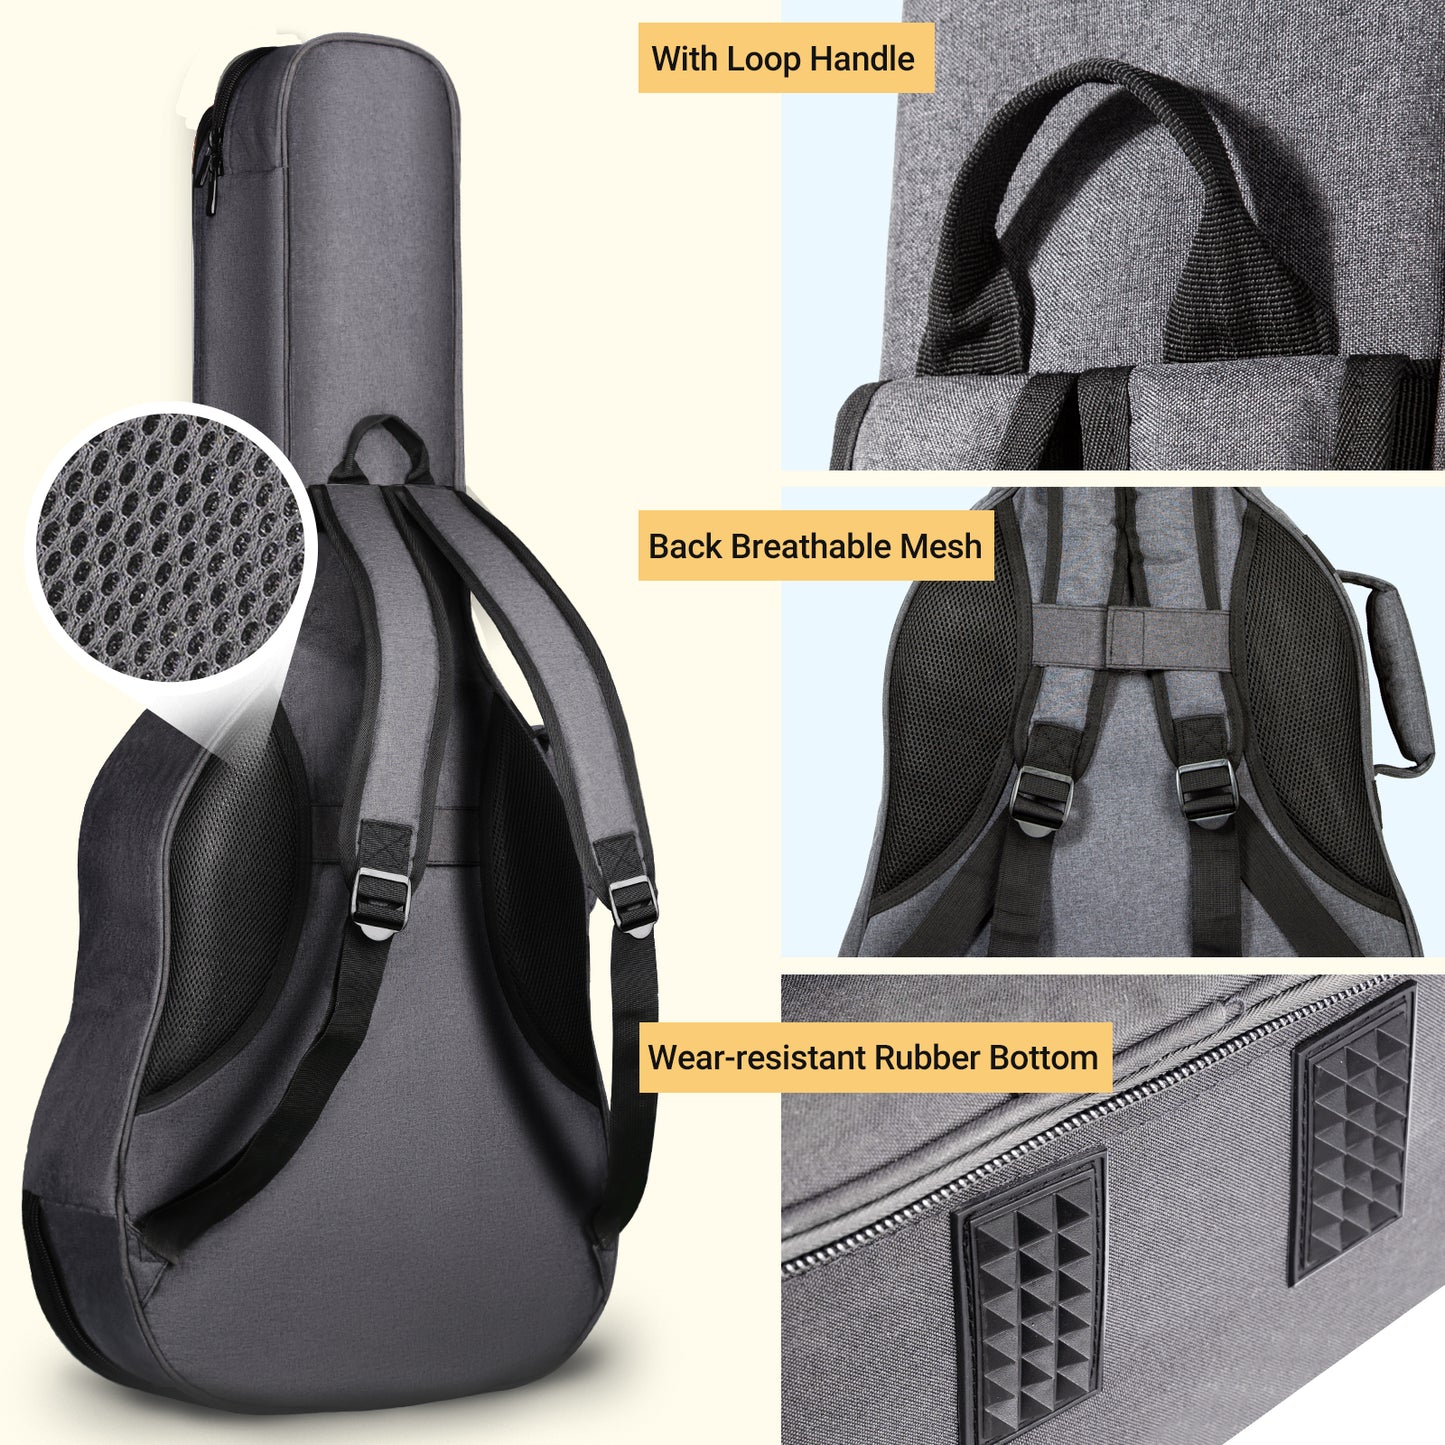 Acoustic Guitar Case 0.7 Inch Thick Gray CY0176